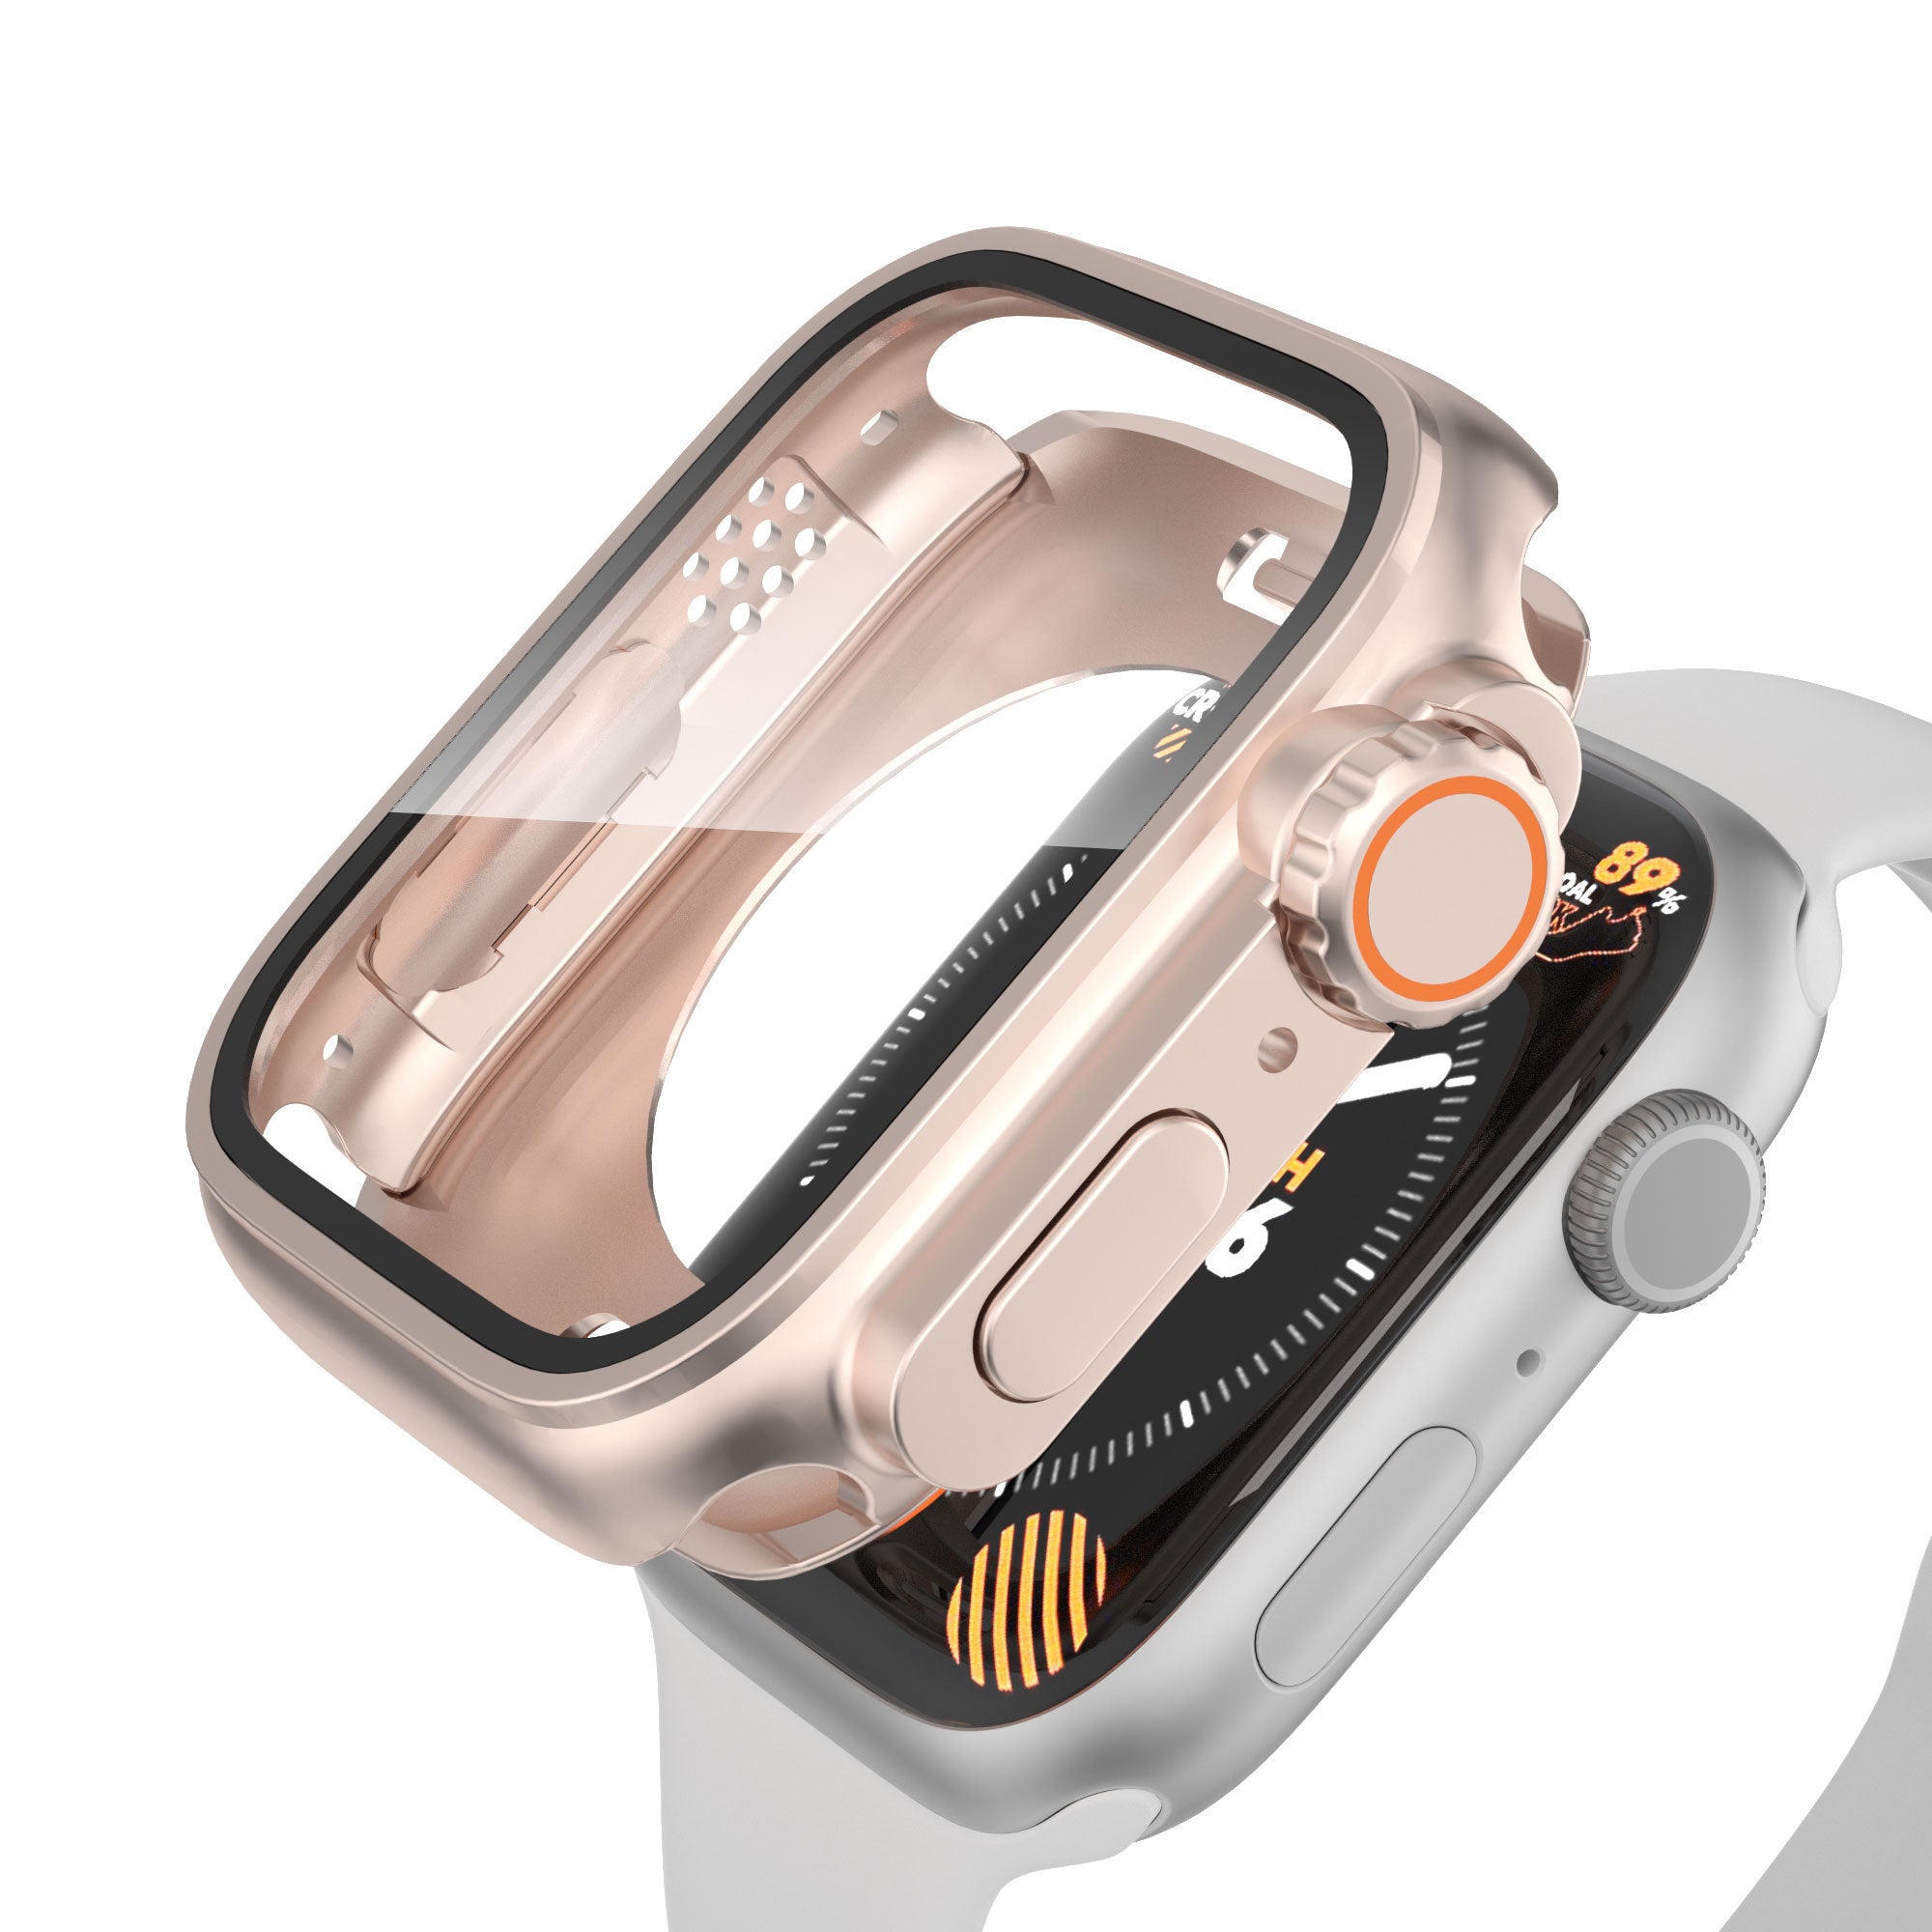 Uniqkart for Apple Watch Series 8 7 41mm Waterproof Case Ultra-Thin Shockproof Hard PC Cover with Tempered Glass Screen Protector - Rose Gold